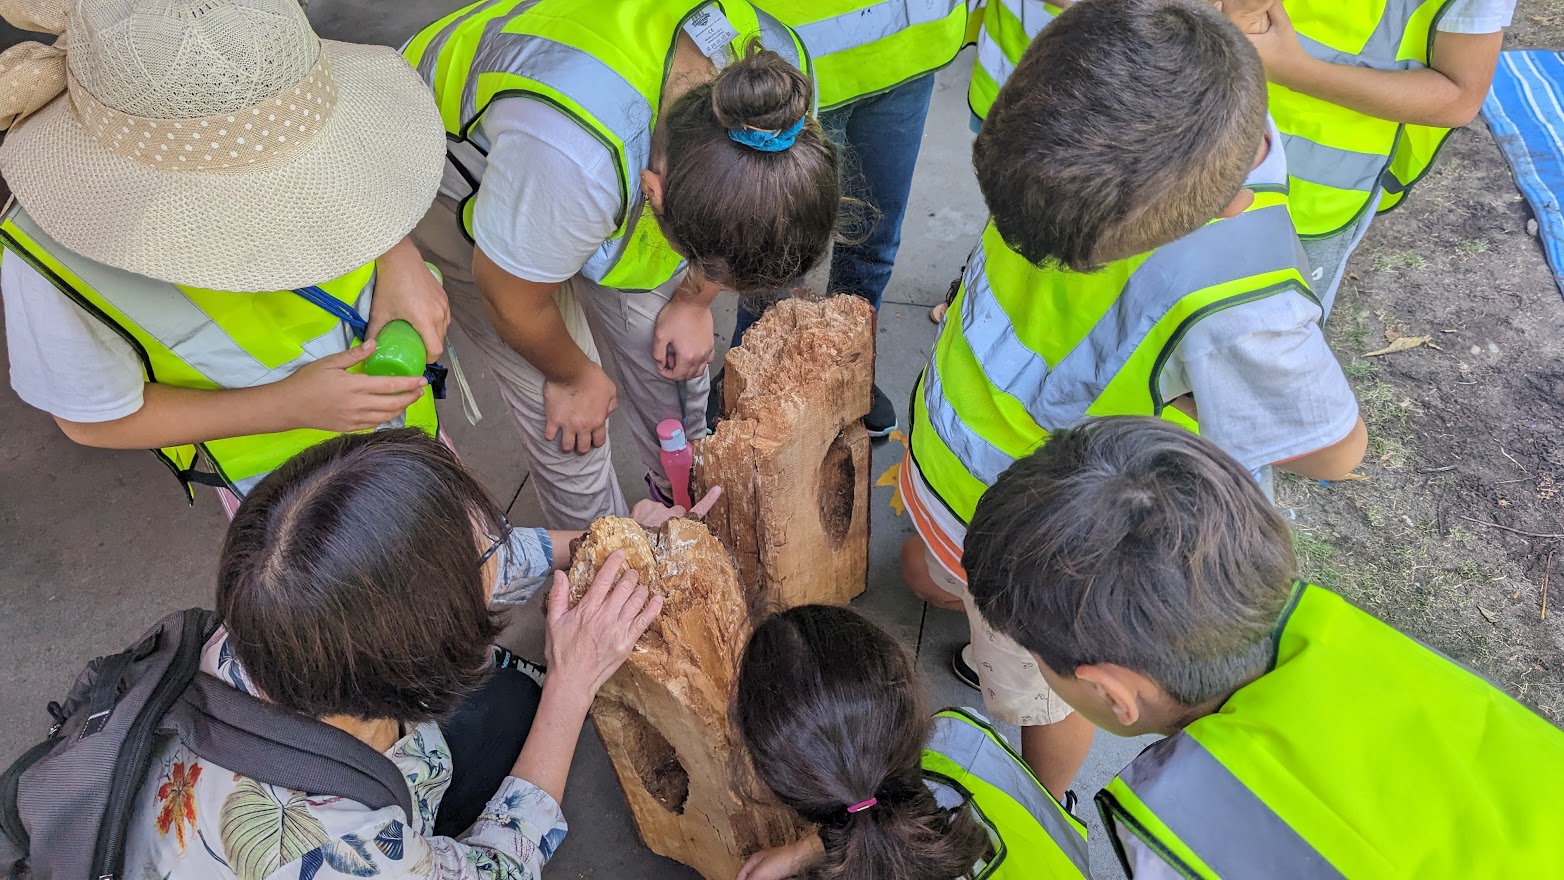 Looking over the heads of children as they are bent over a log that has been cut in half, discussing the animals that used it with an instructor.